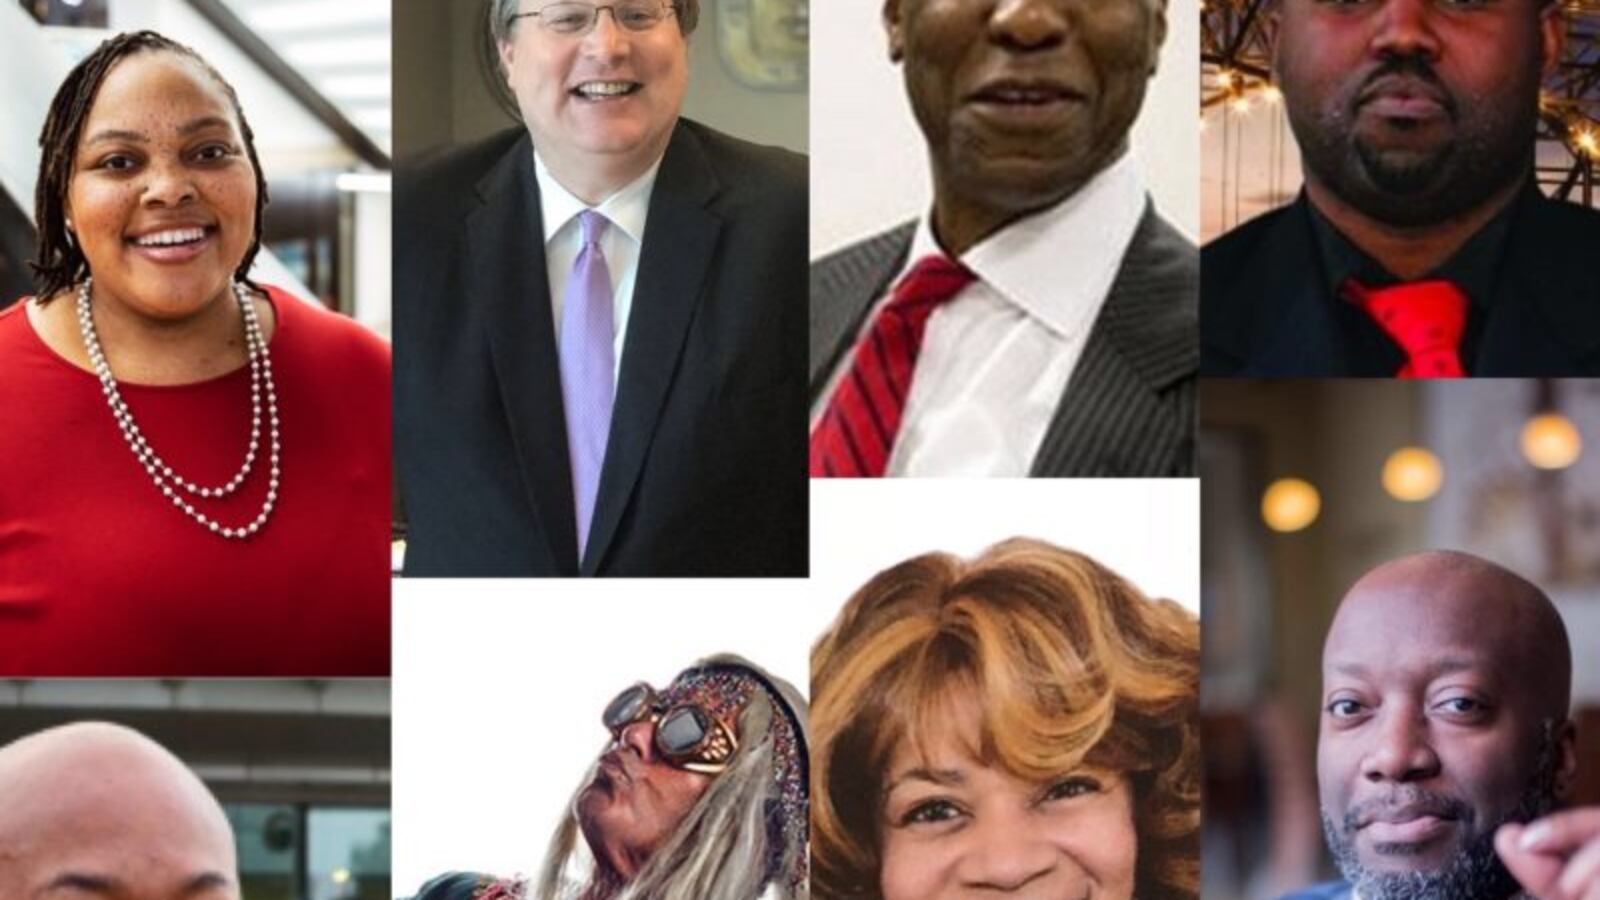 Of the 11 candidates for Memphis mayor, six responded to Chalkbeat's survey.